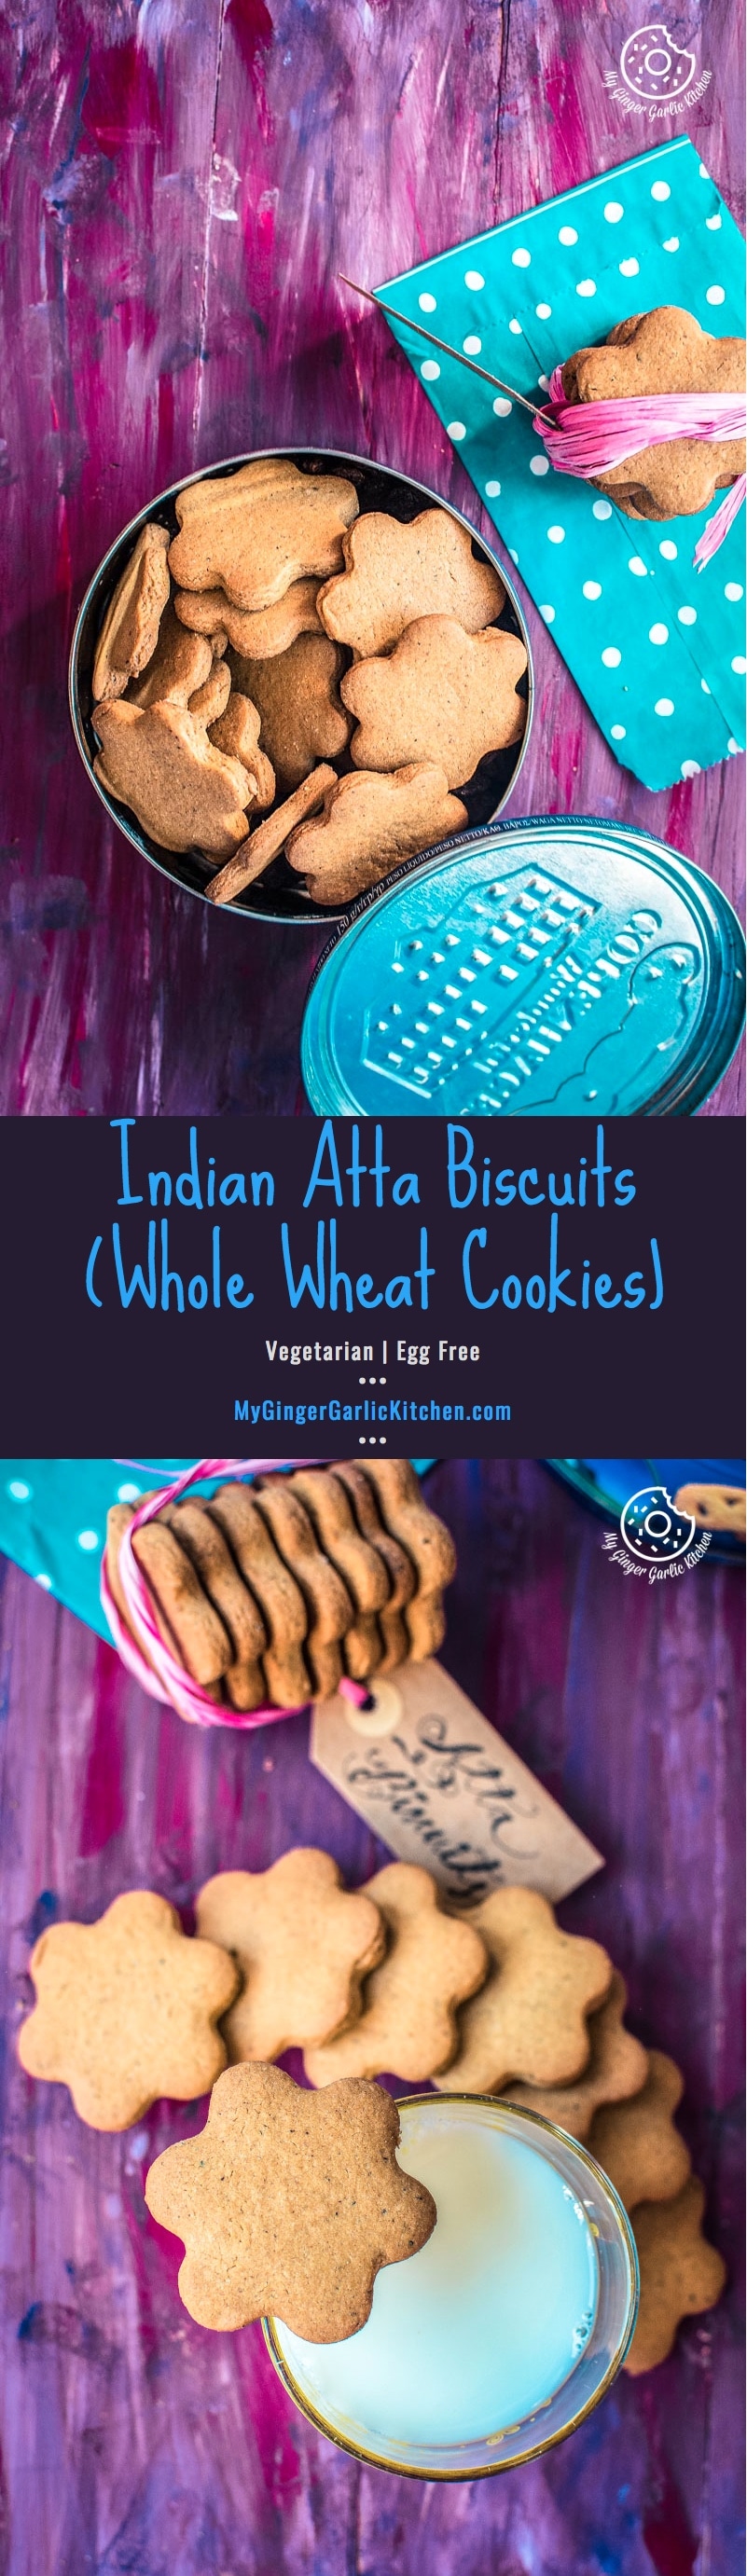 How To Make Atta Biscuit | Whole Wheat Cookies | mygingergarlickitchen.com/ @anupama_dreams